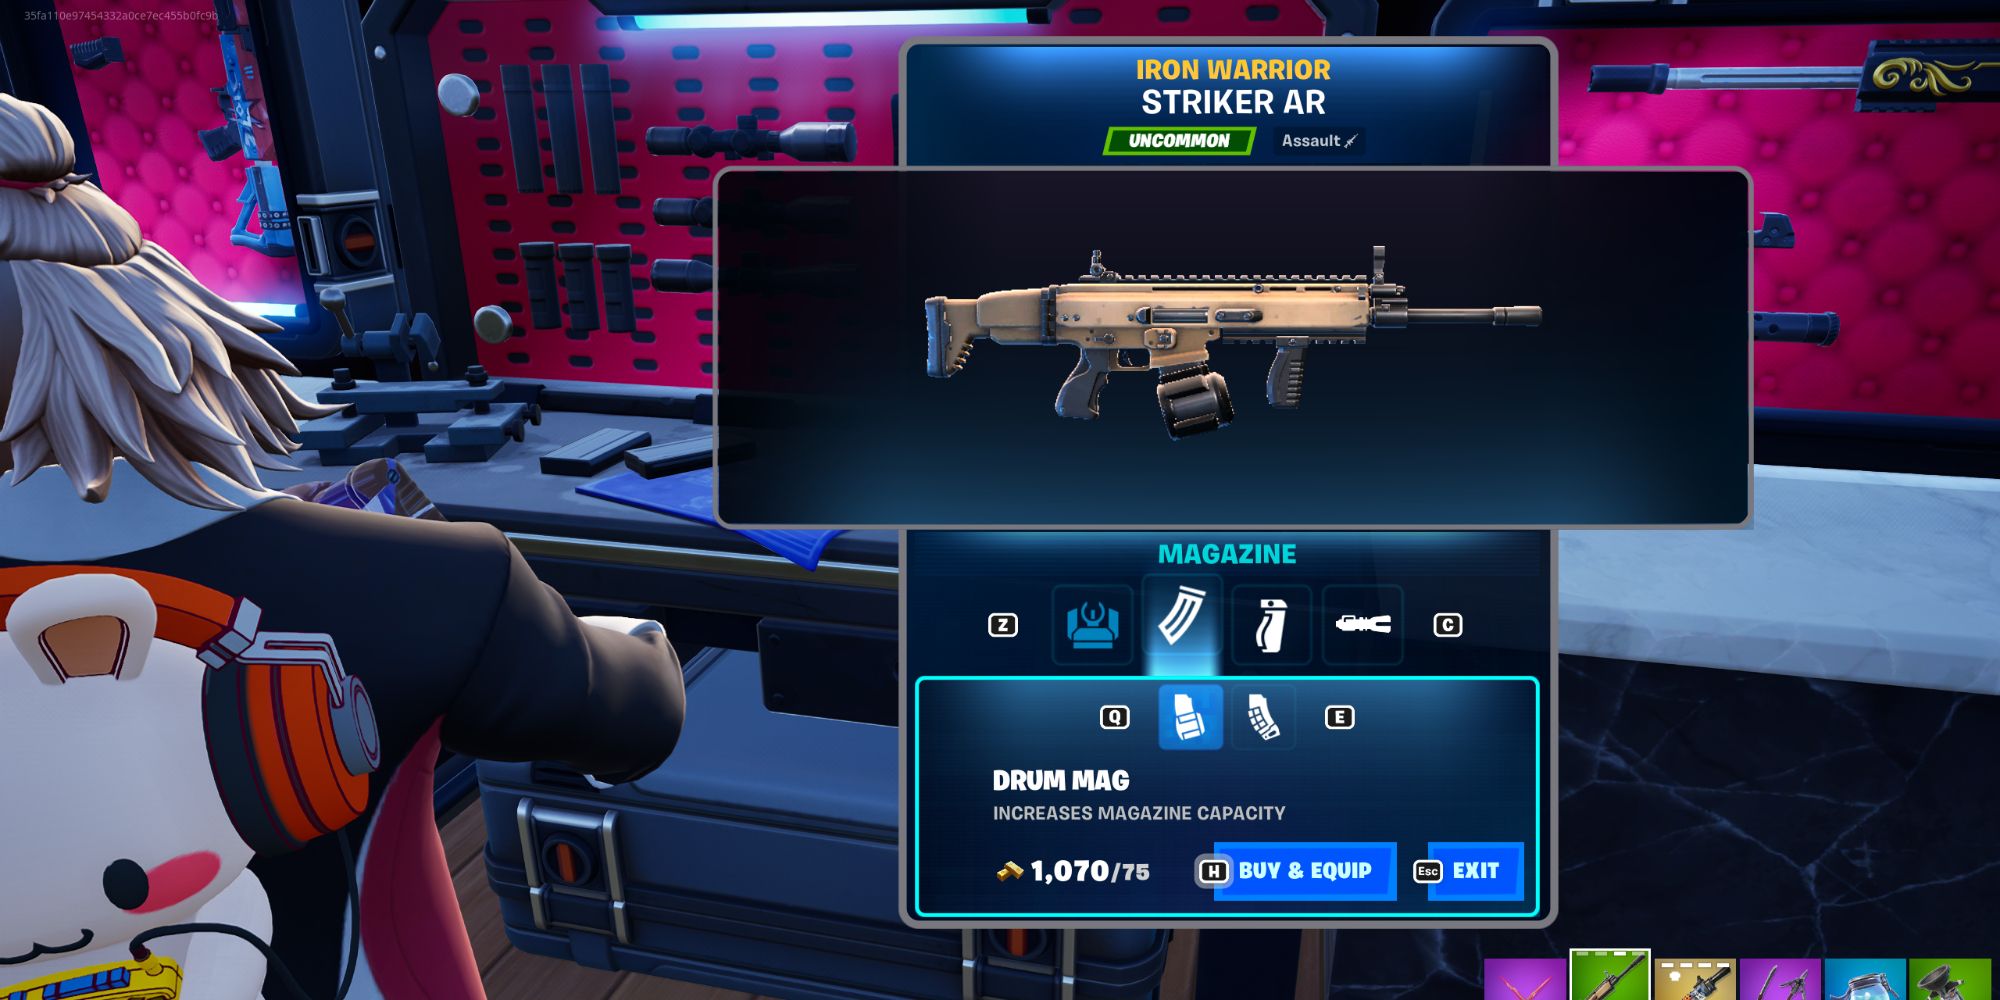 An image from Fortnite of the Drum Mag Attachment, which increases the magazine capacity.